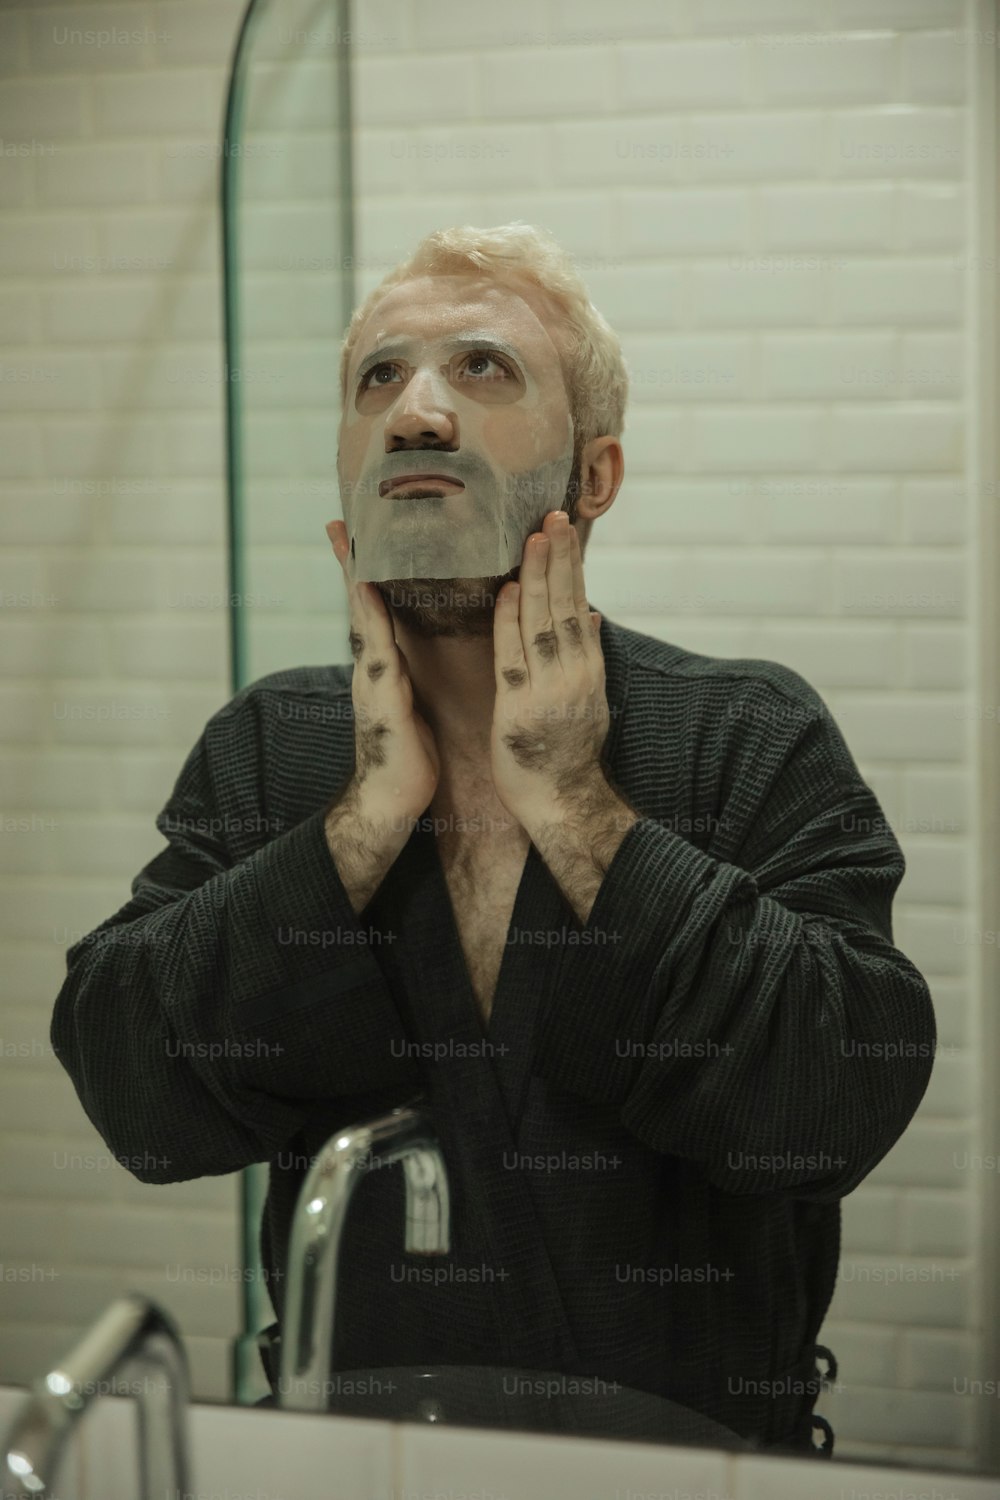 a man is shaving his face in front of a mirror